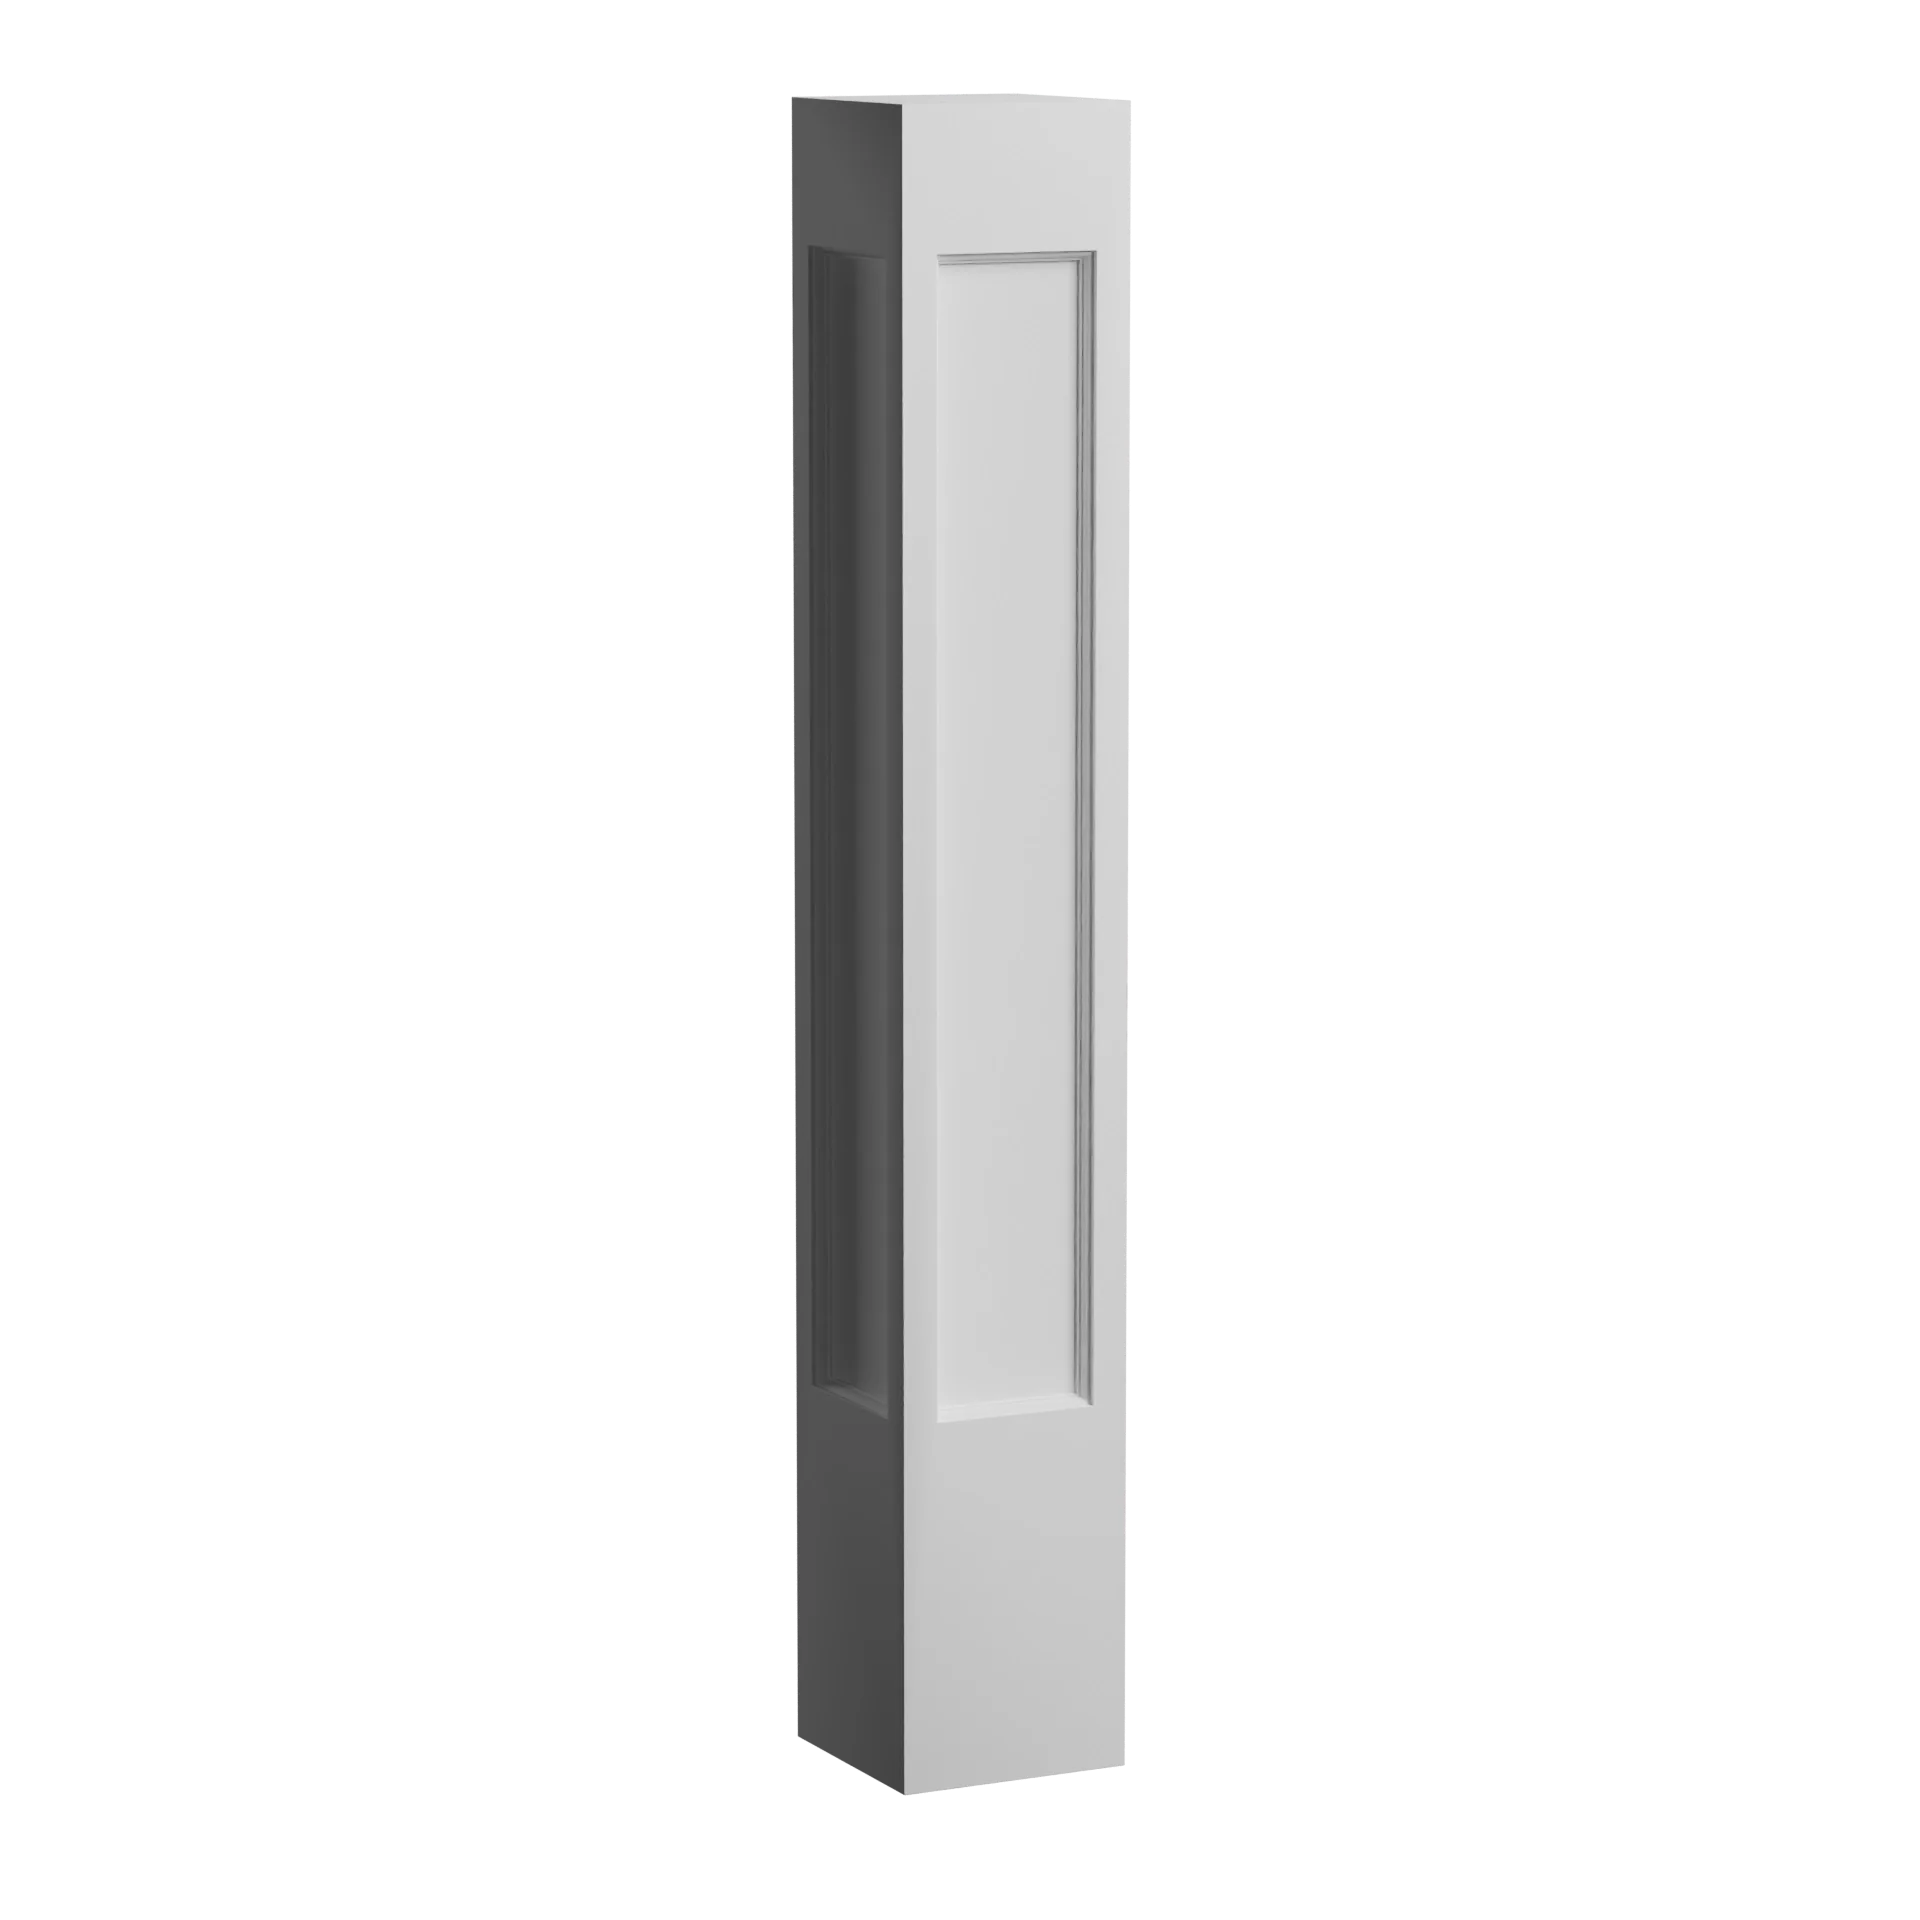 8 Inch W x 48 Inch H Recessed Flat Panel Newel Post Inline